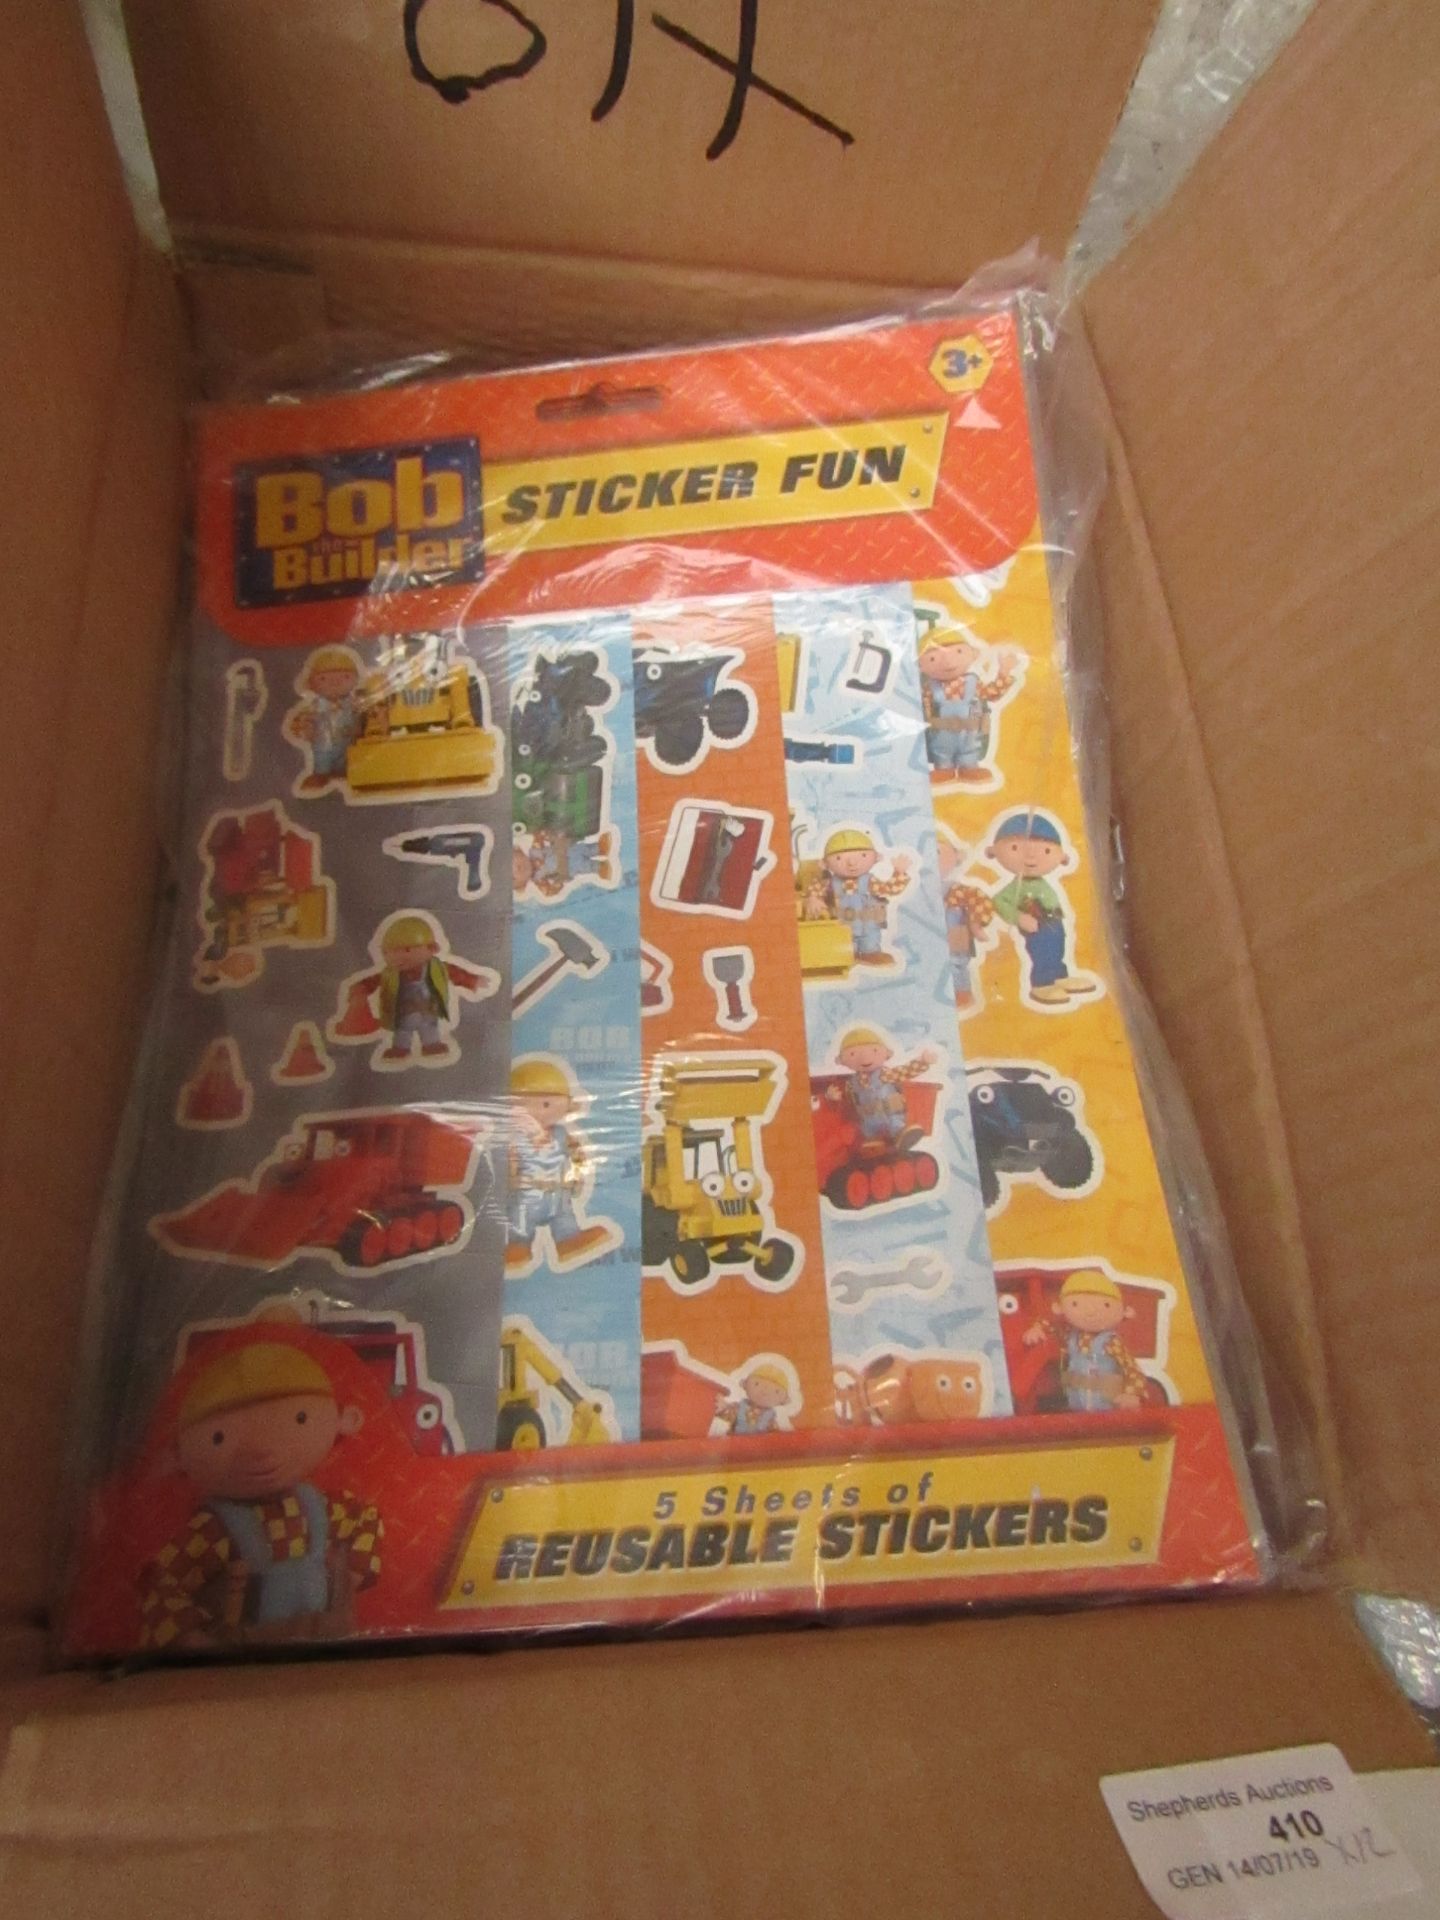 12 X  Packs Of Bob The Builder Sticker Fun Sheets, inc 5 X Sheets per pack ( Reusable ) new in